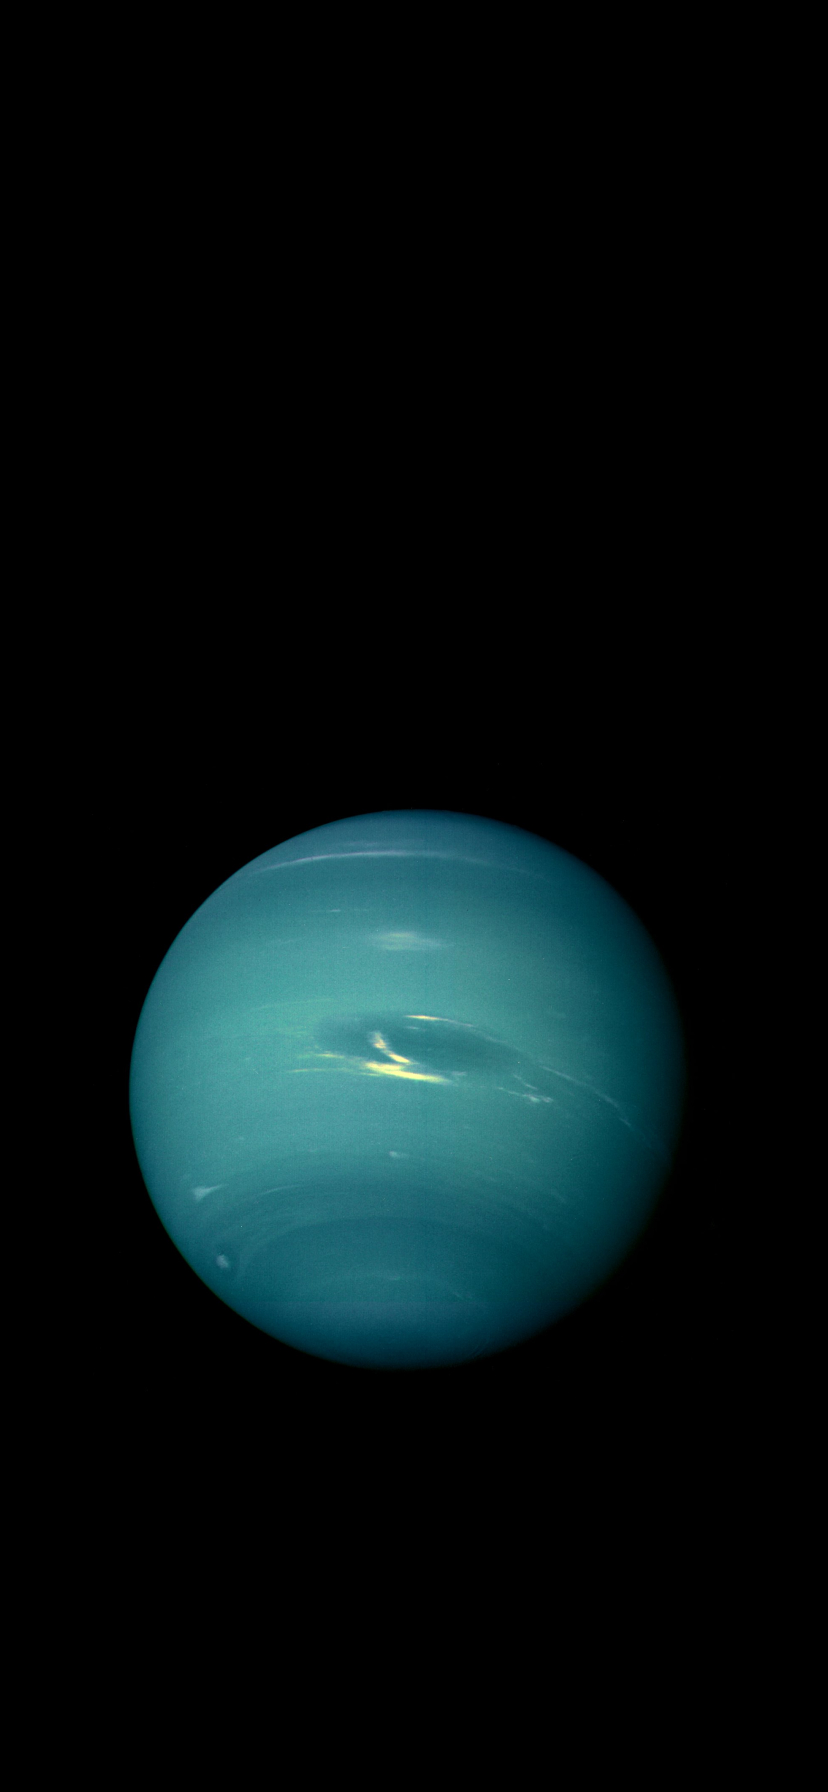 Neptune From Voyager Wallpaper Wallaland